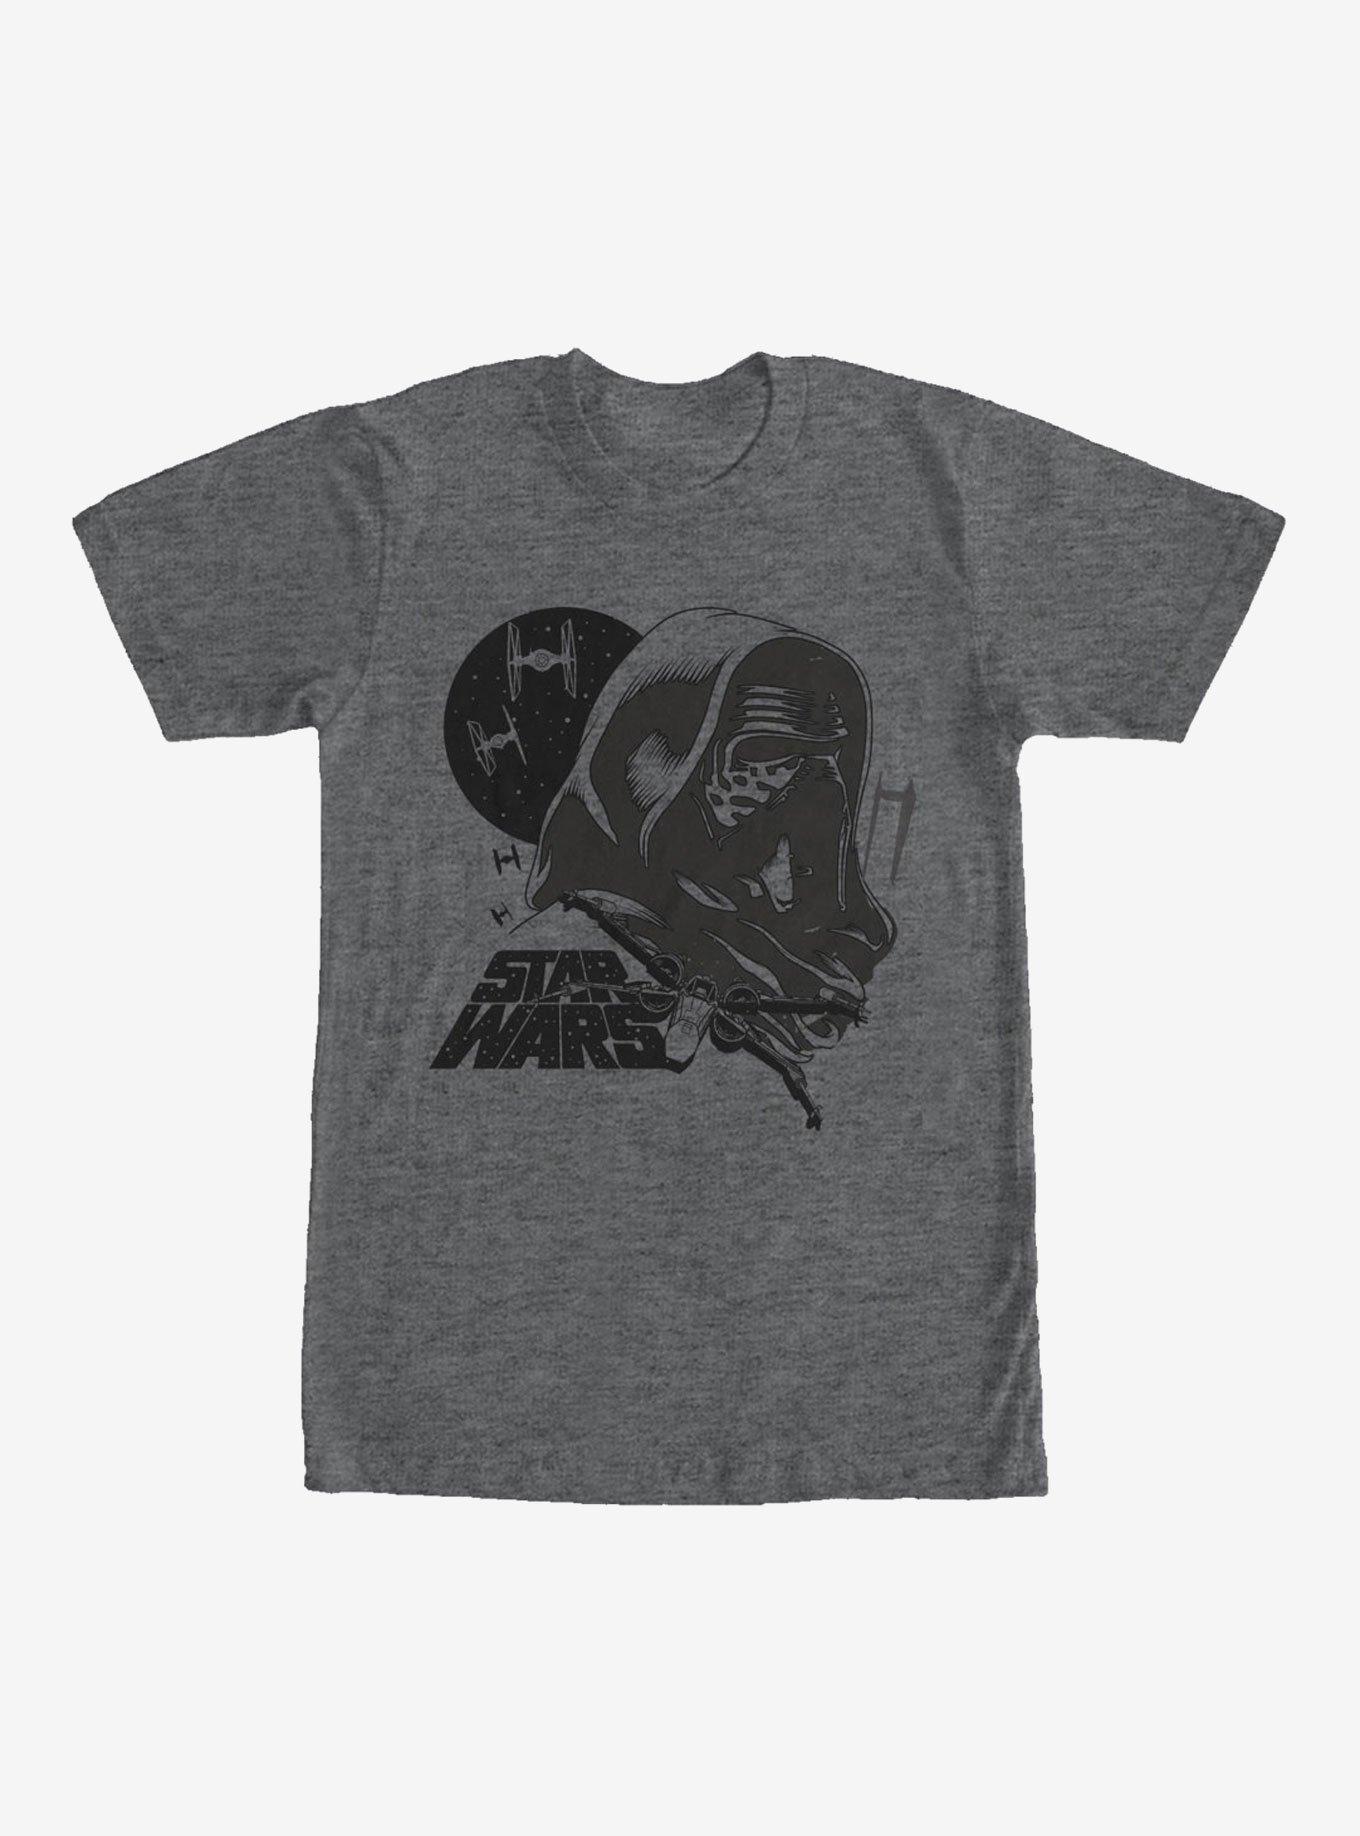 Star Wars Kylo Ren X-Wing and TIE Fighters T-Shirt